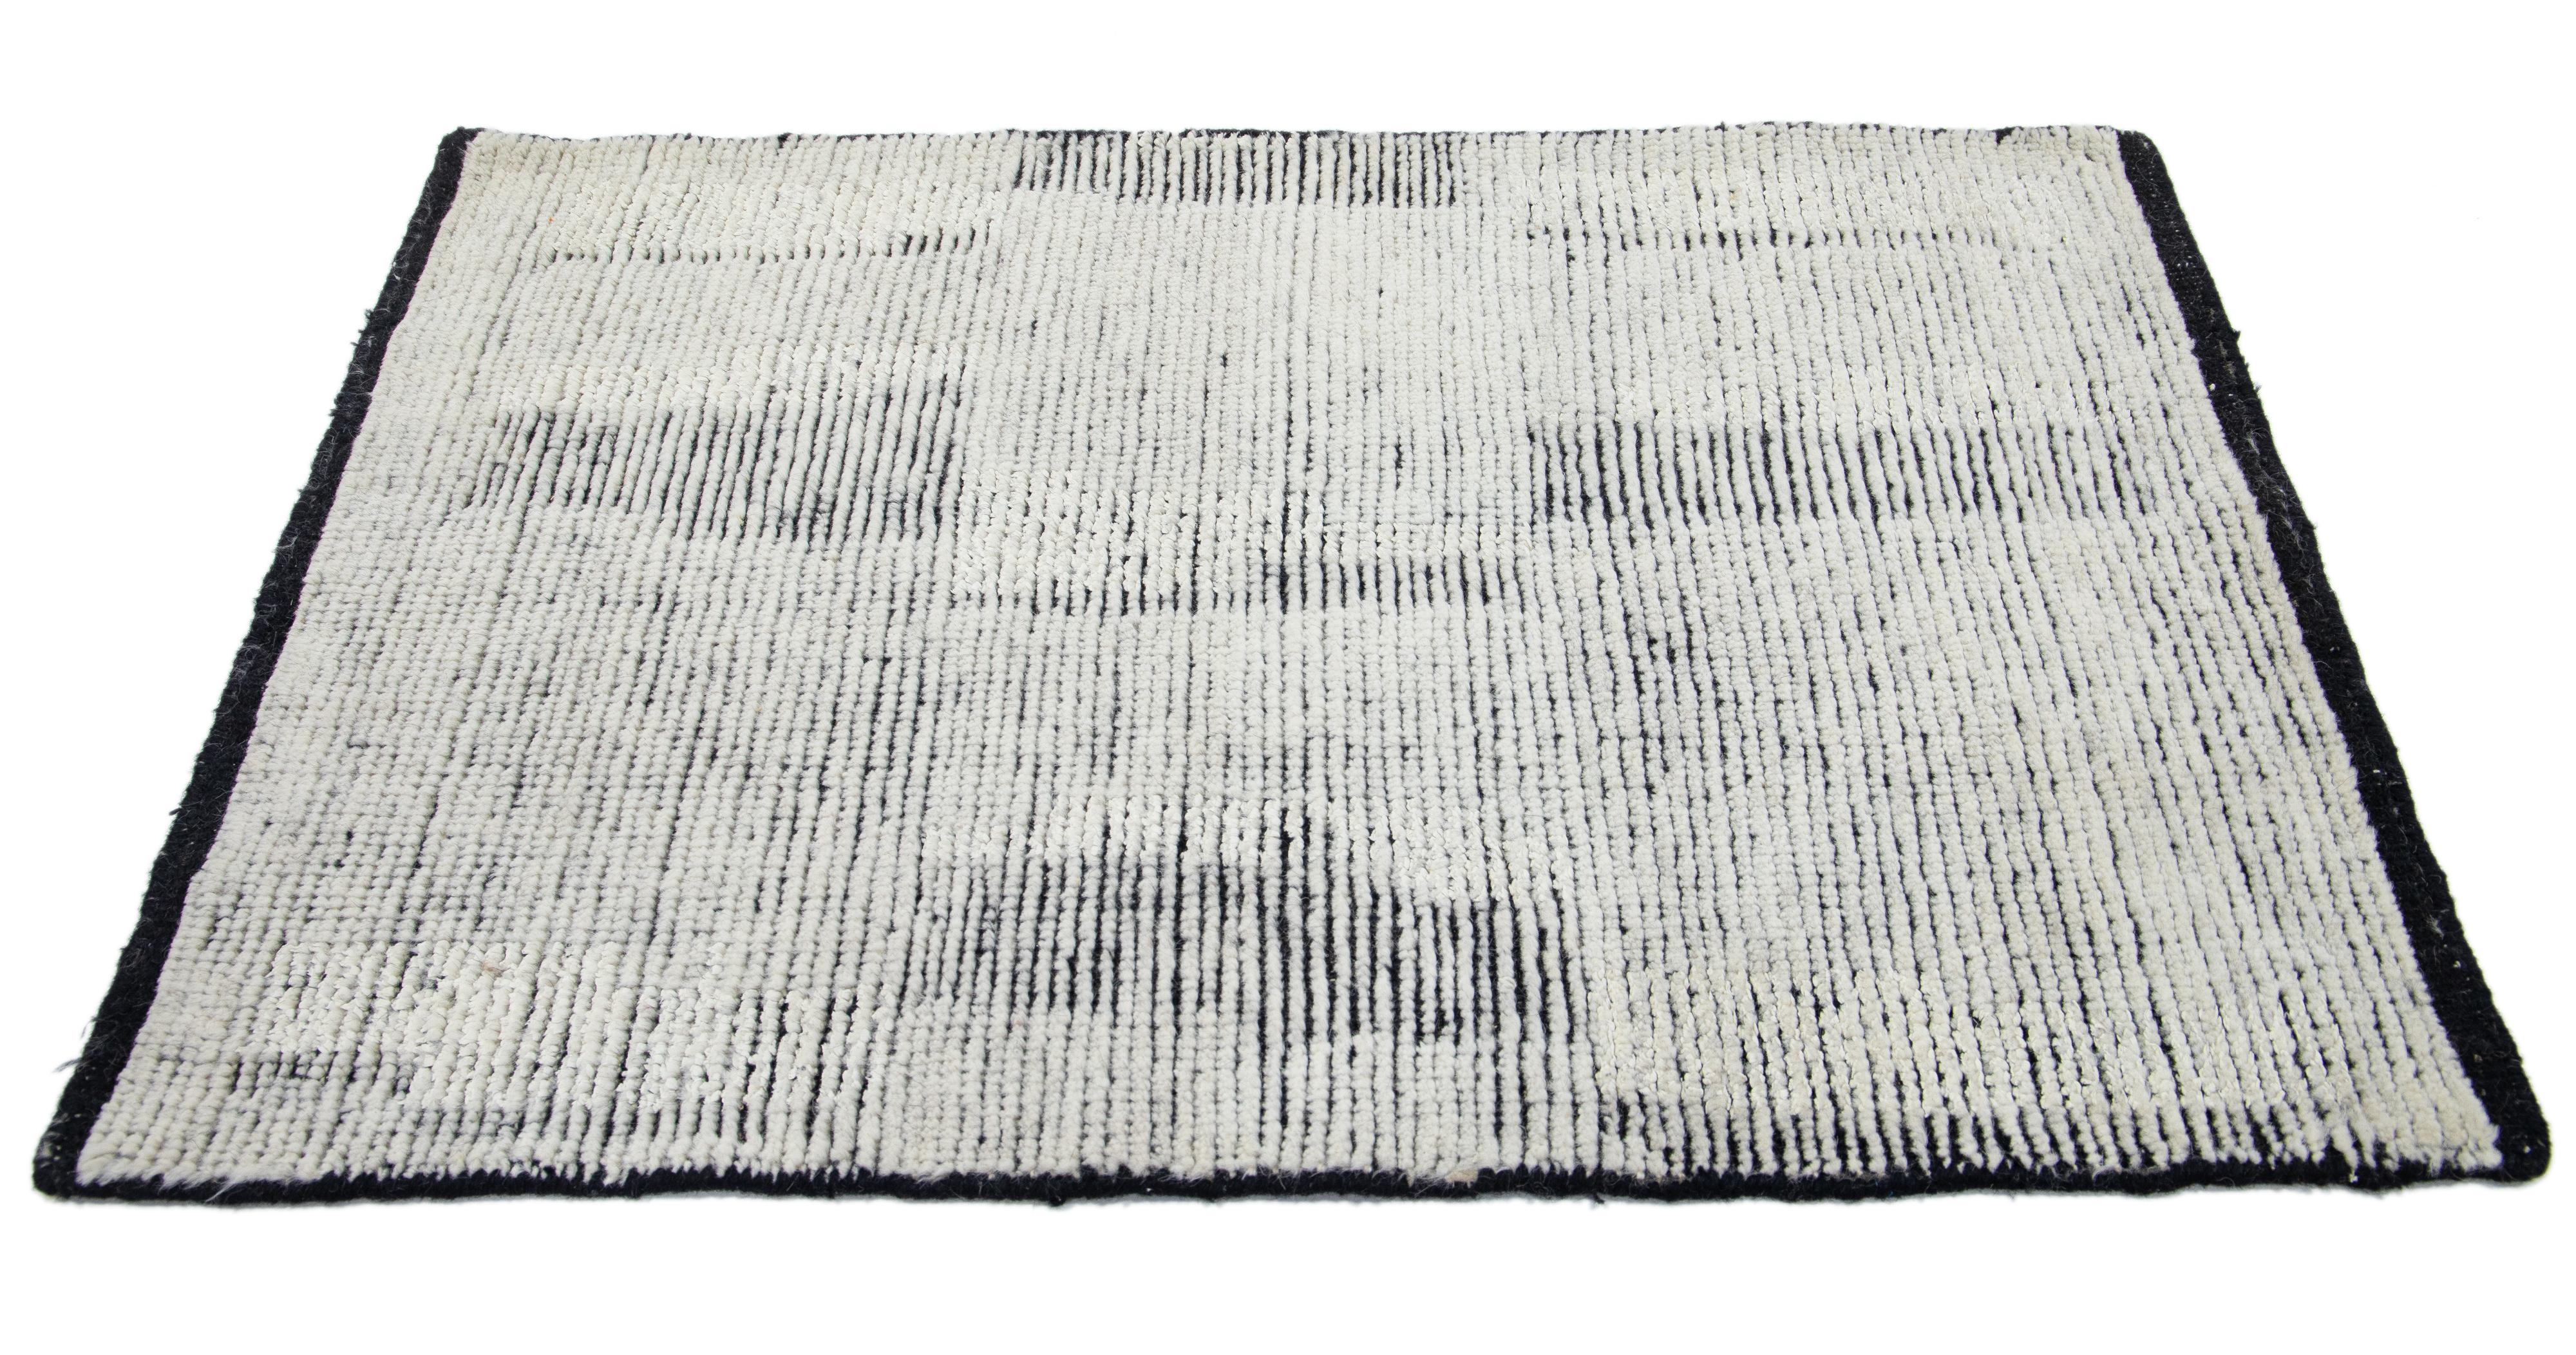 Apadana's Modern Moroccan style wool custom rug. Custom sizes and colors made-to-order. 

Material: Wool 
Techniques: Hand-Knotted
Style: Moroccan 
Lead time: Approx. 15-16 wks available 
Colors: As shown, other custom colors are available.